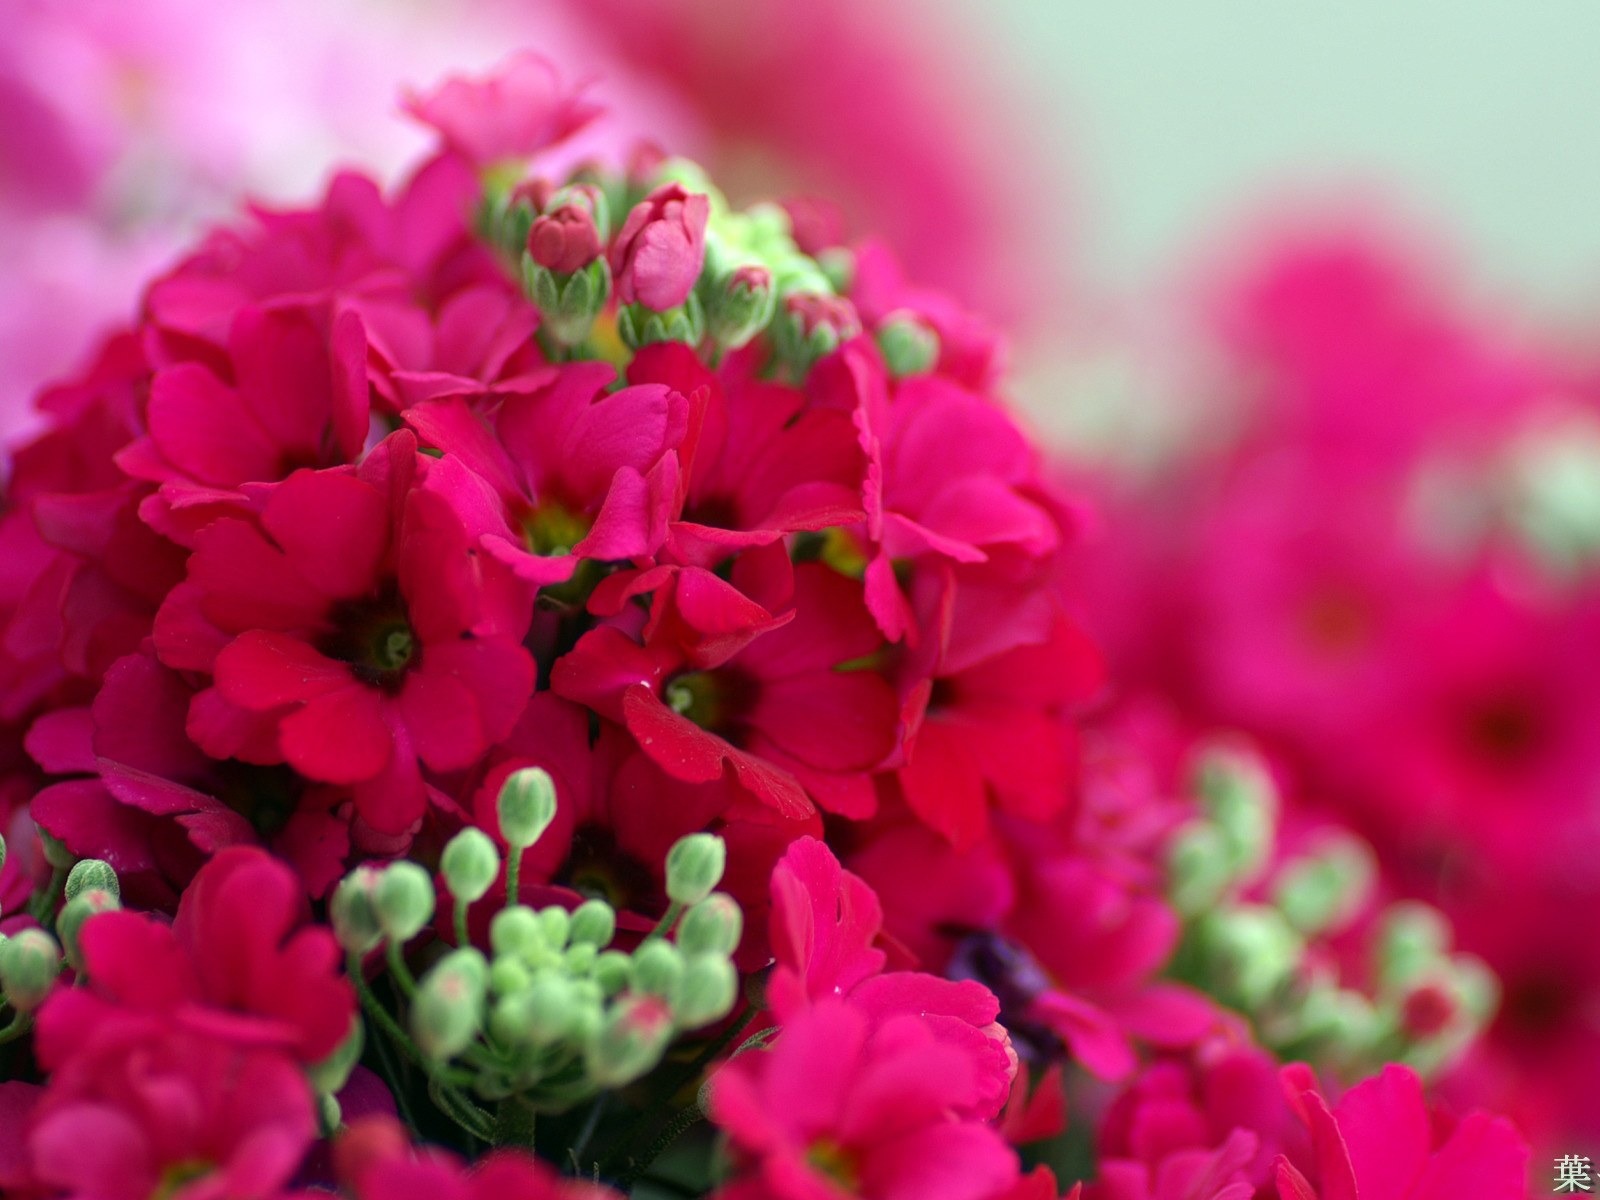 Personal Flowers HD Wallpapers #27 - 1600x1200